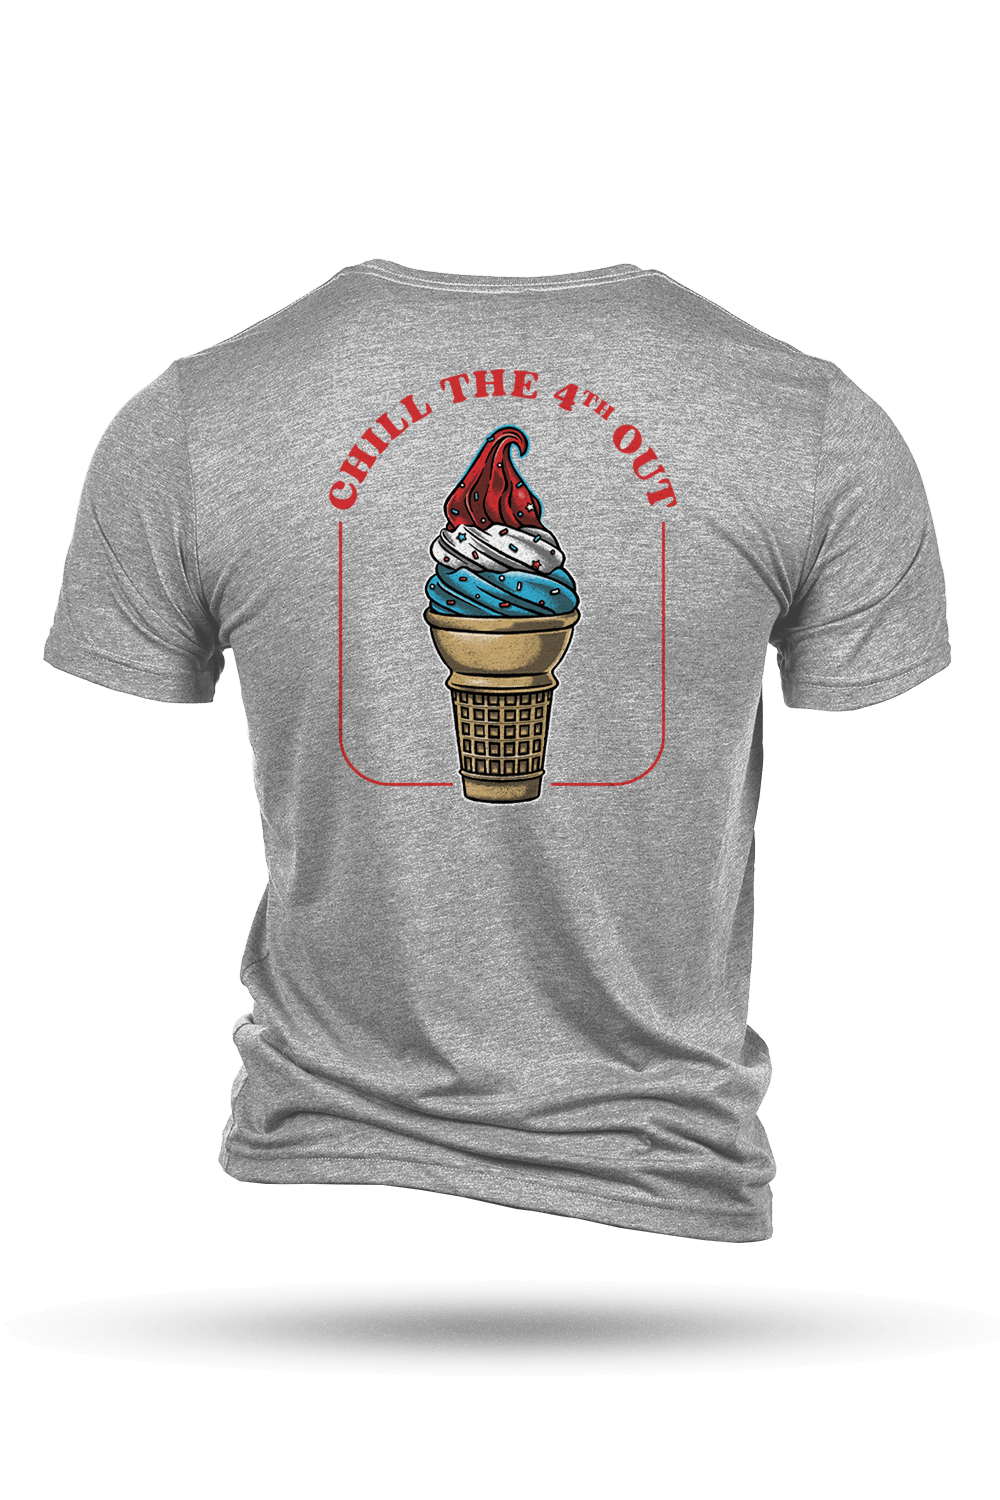 T - Shirt - Chill the 4th out